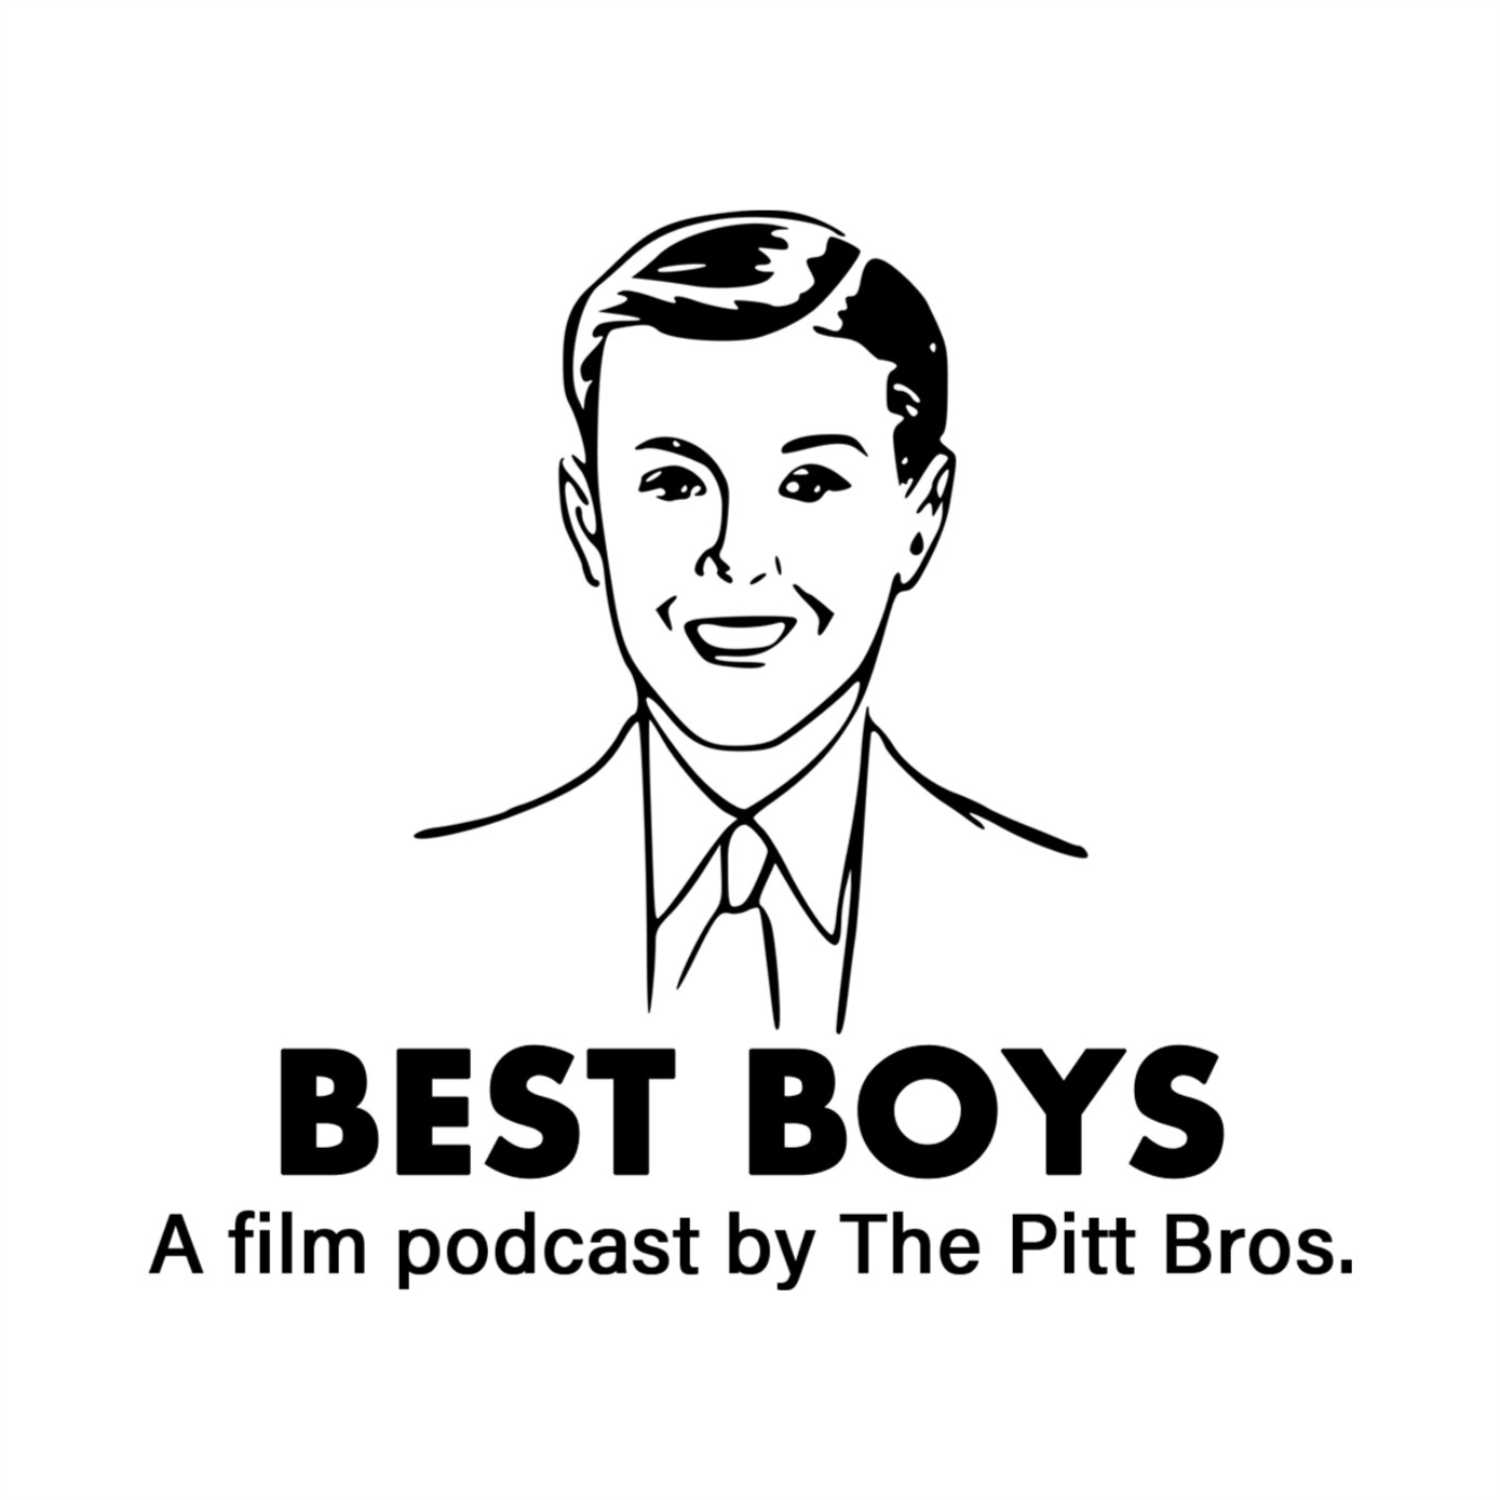 BEST BOYS: A film podcast #38 - Se7en, The Girl with the Dragon Tattoo